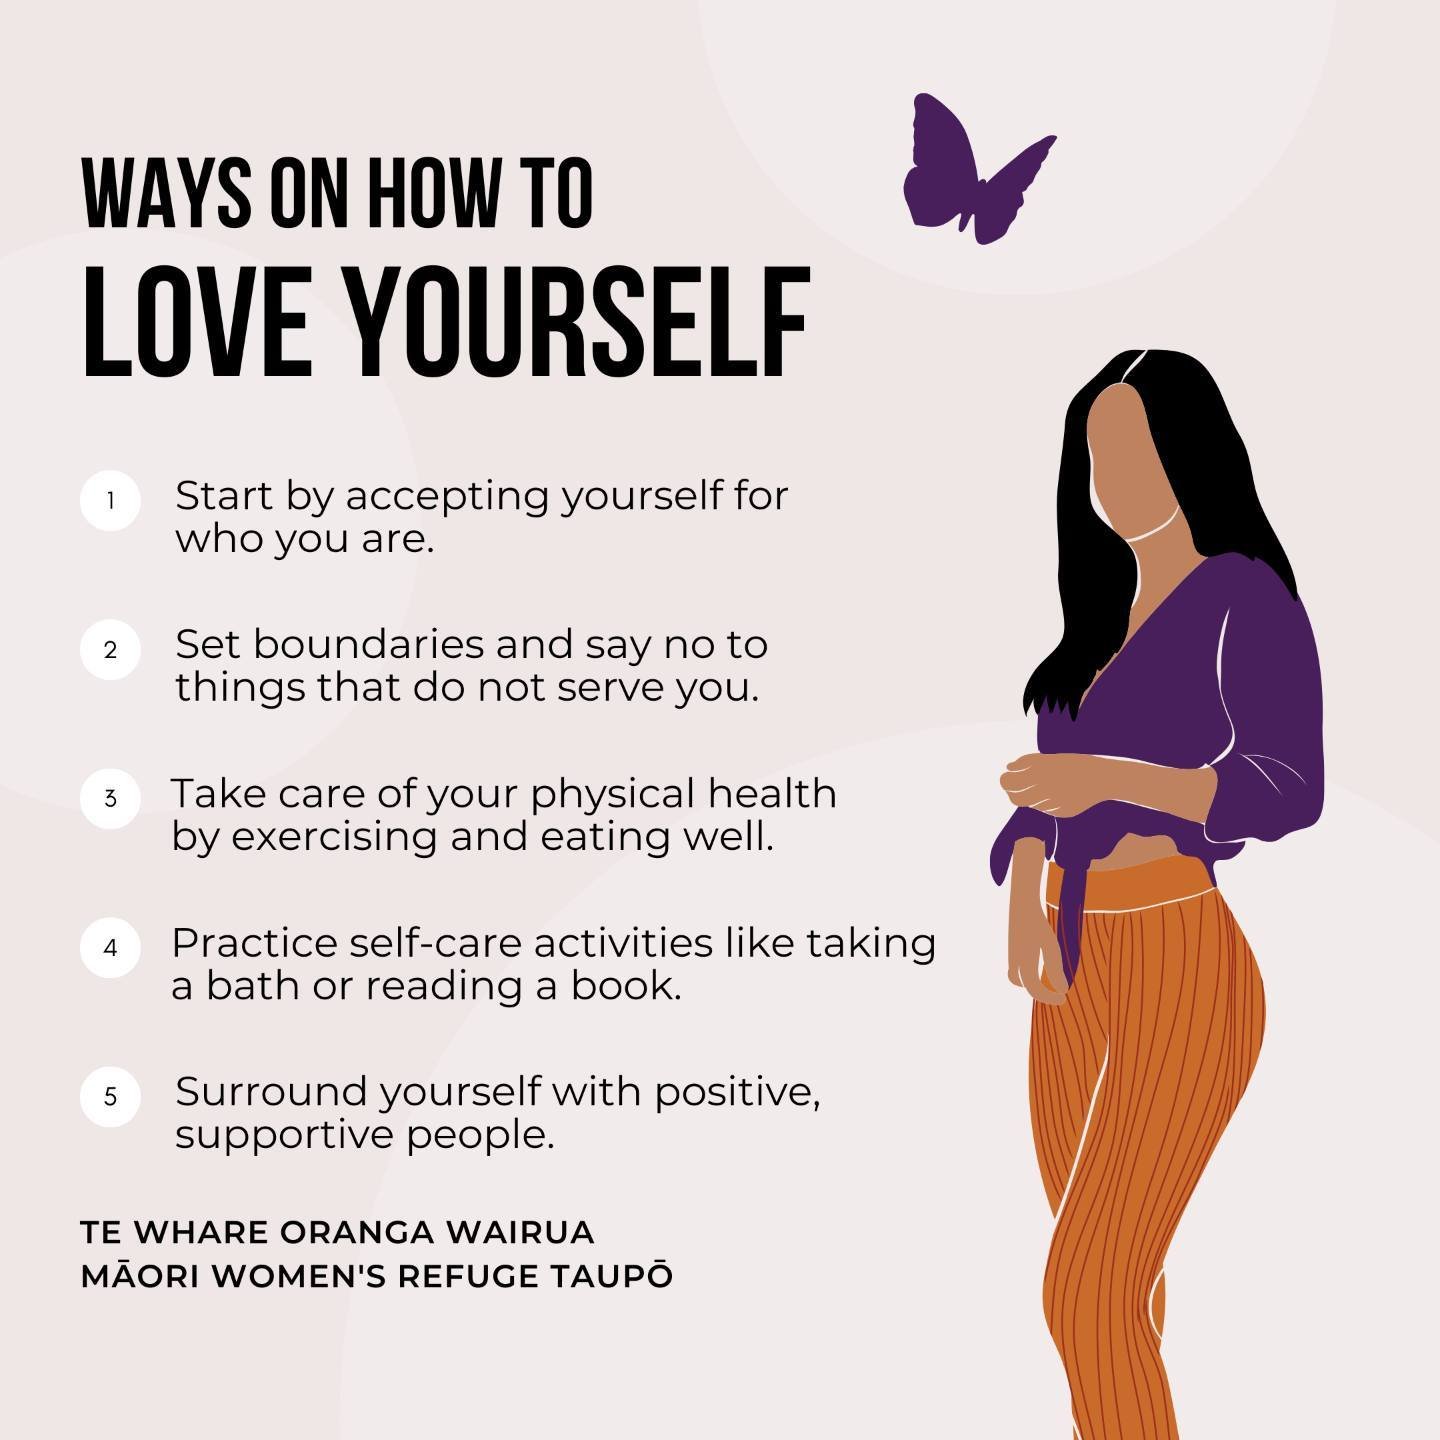 It is important to love yourself and prioritise self-care because taking care of your own well-being and happiness allows you to show up as your best self for both yourself and others.

Let's look at a few ways on how to love yourself...

1. Start by